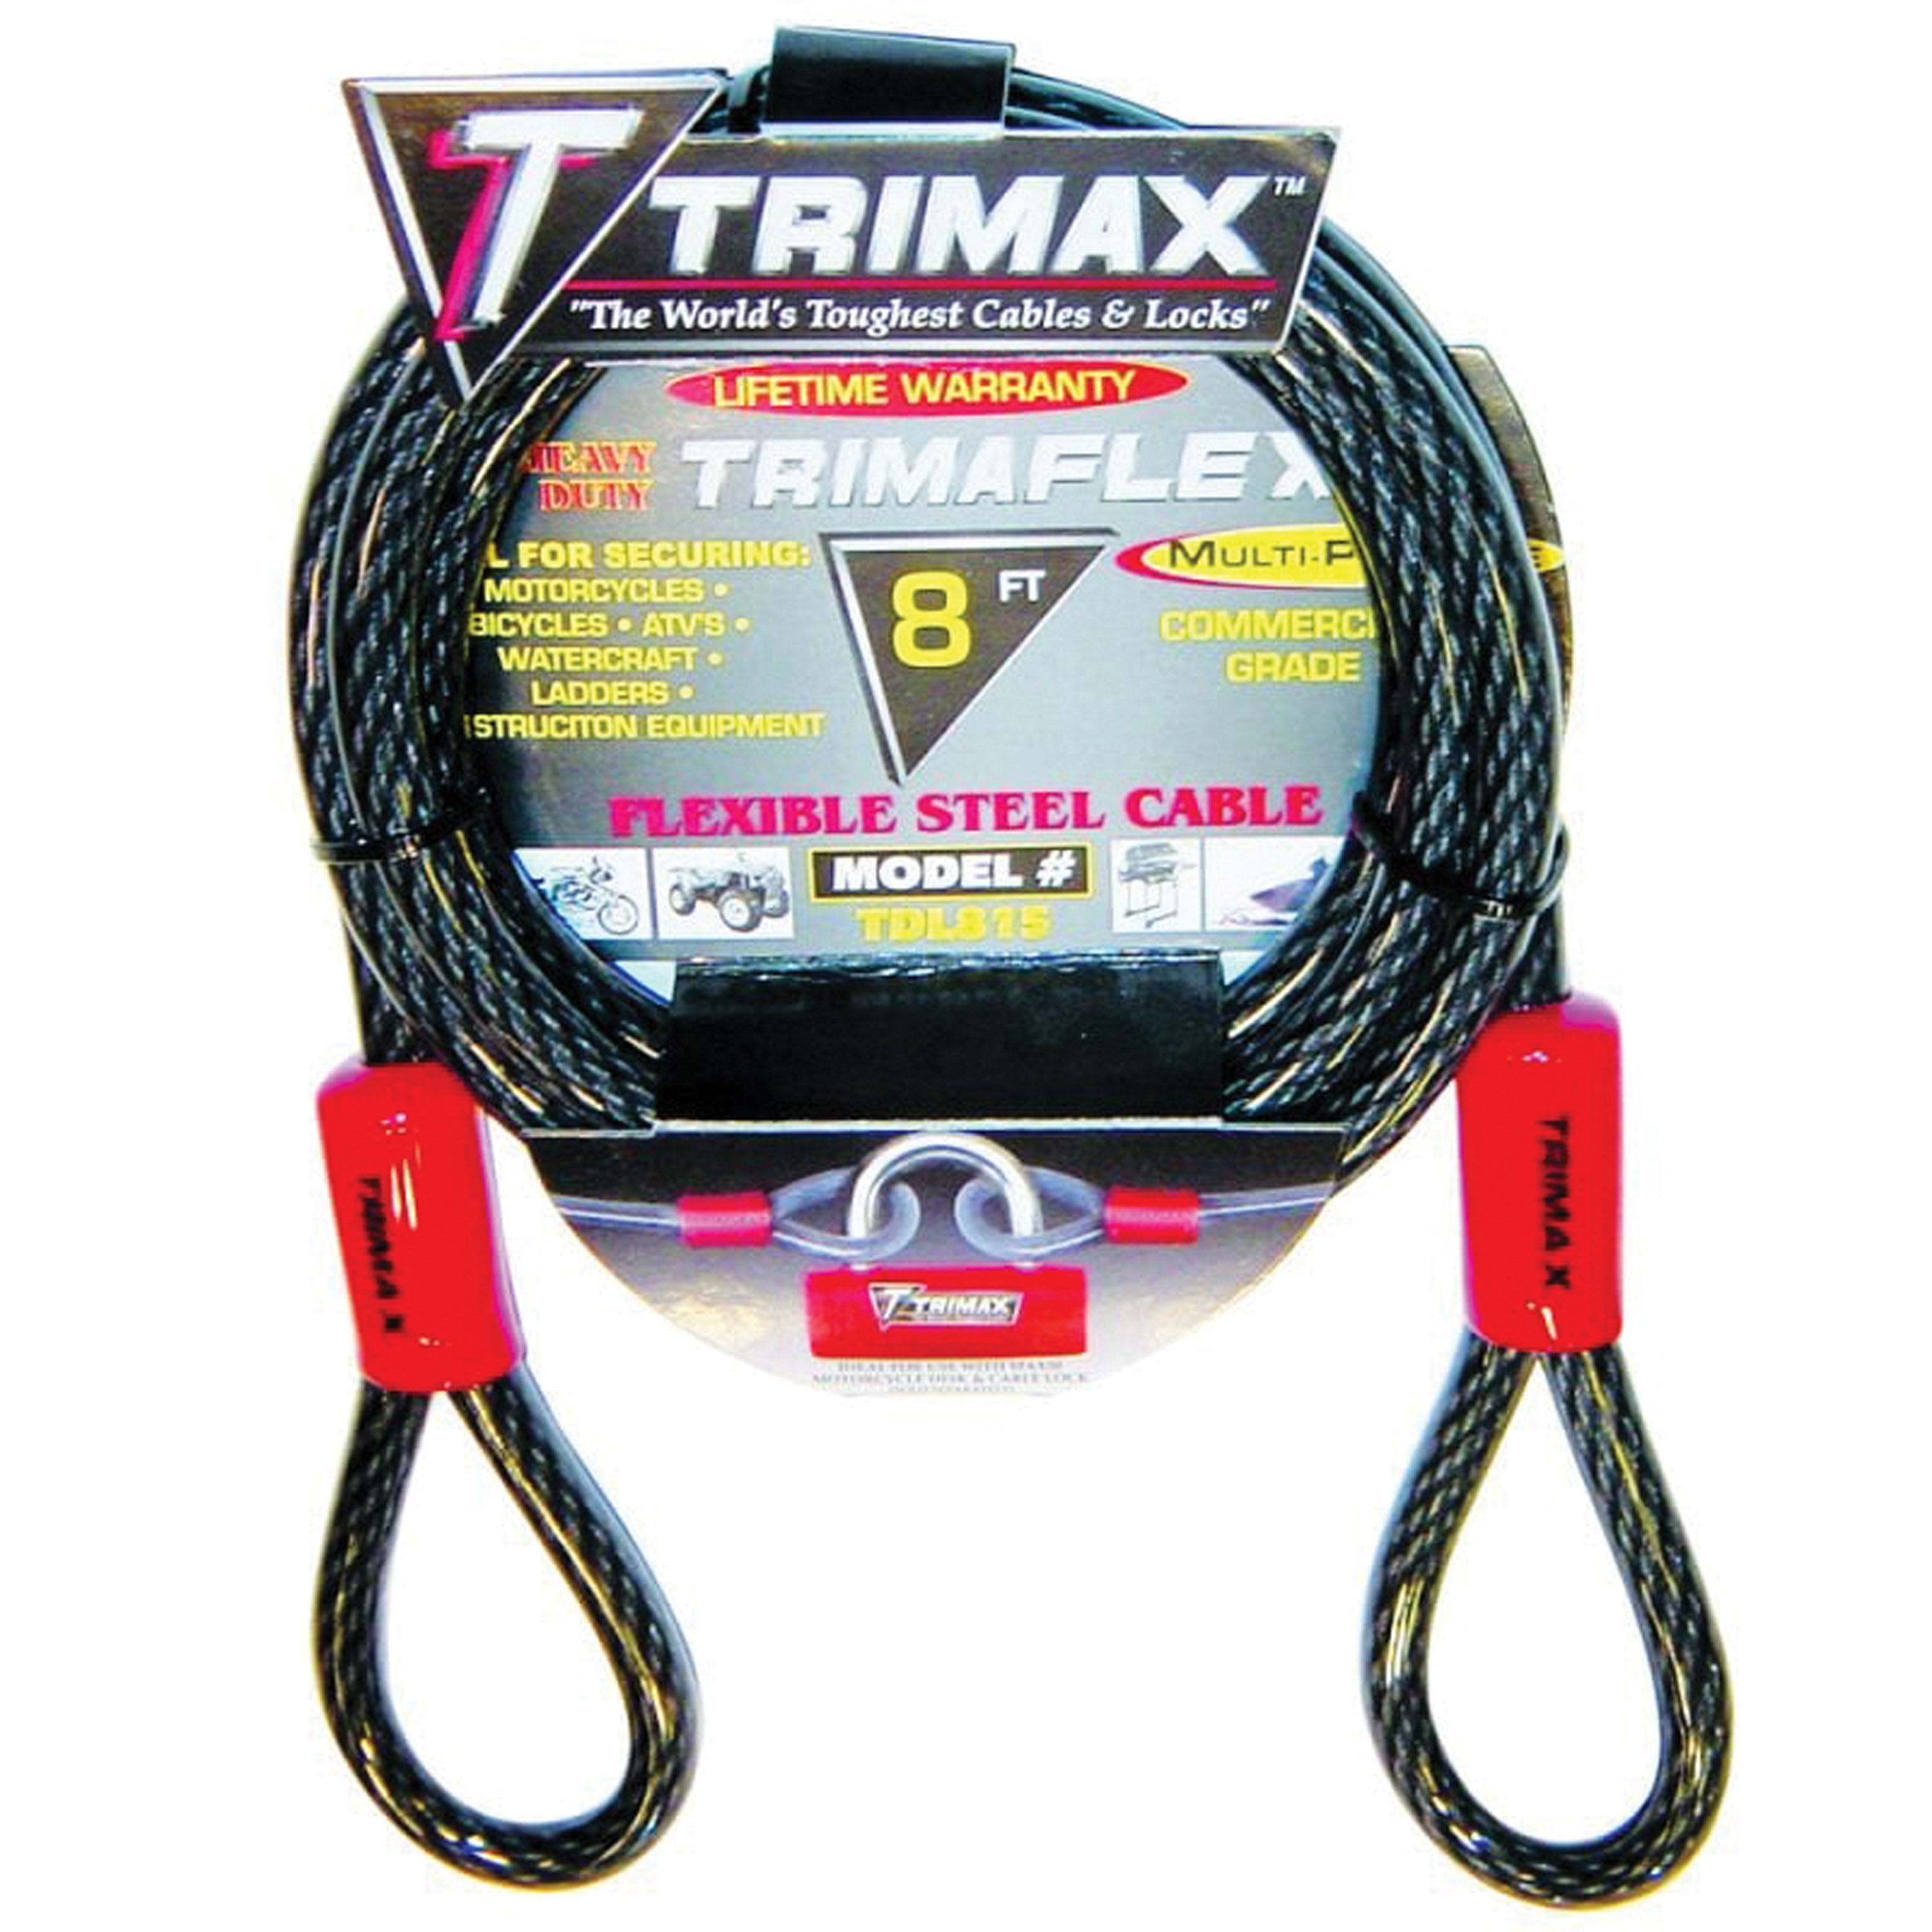 TRIMAX TDL815 TRIMAFLEX Dual Loop Multi-Use Cable - 8' x 15mm